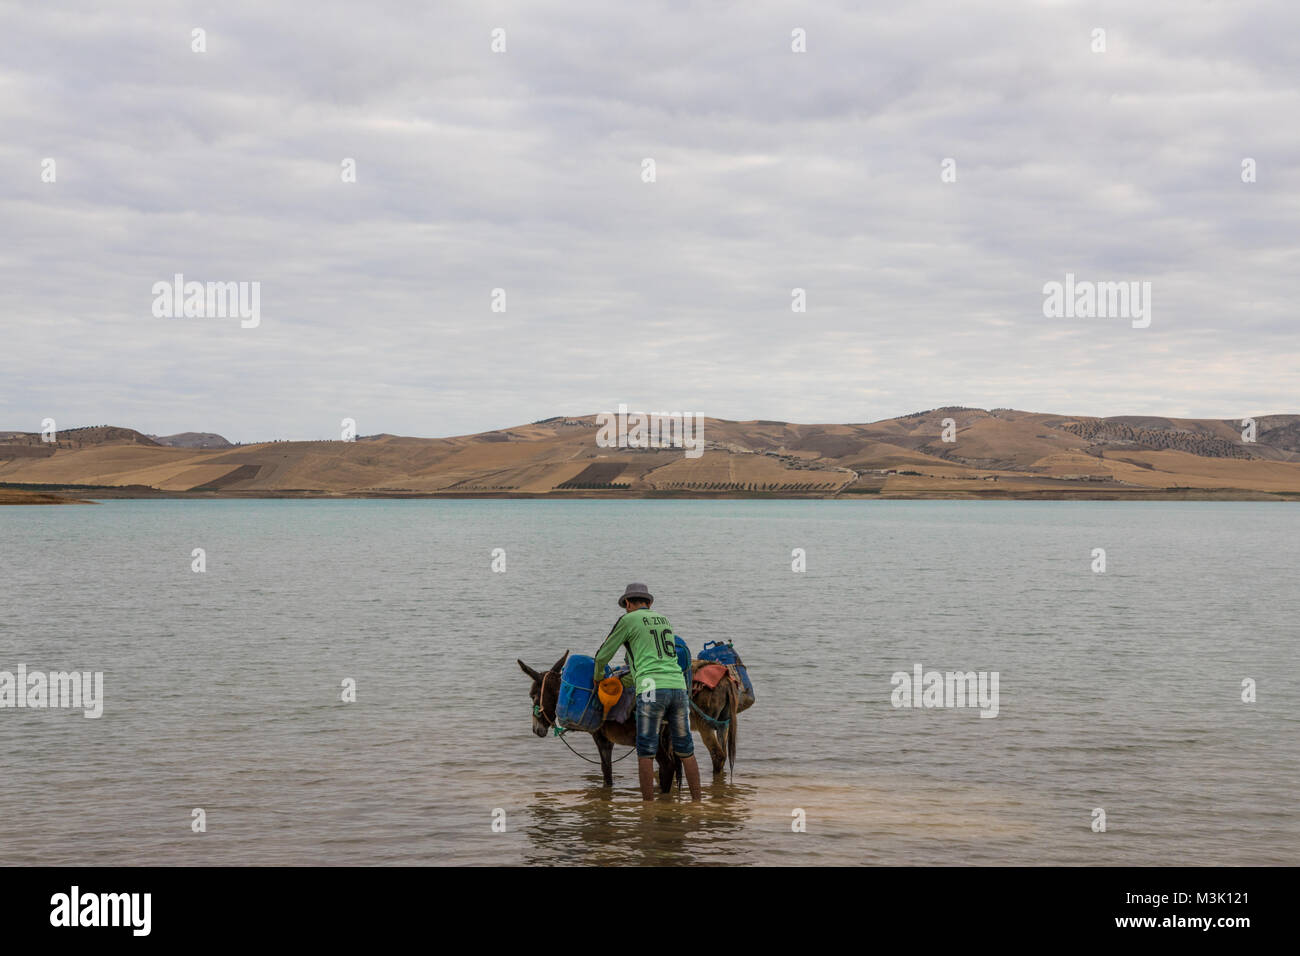 Donkey collecting water from the lake cloudy day Stock Photo